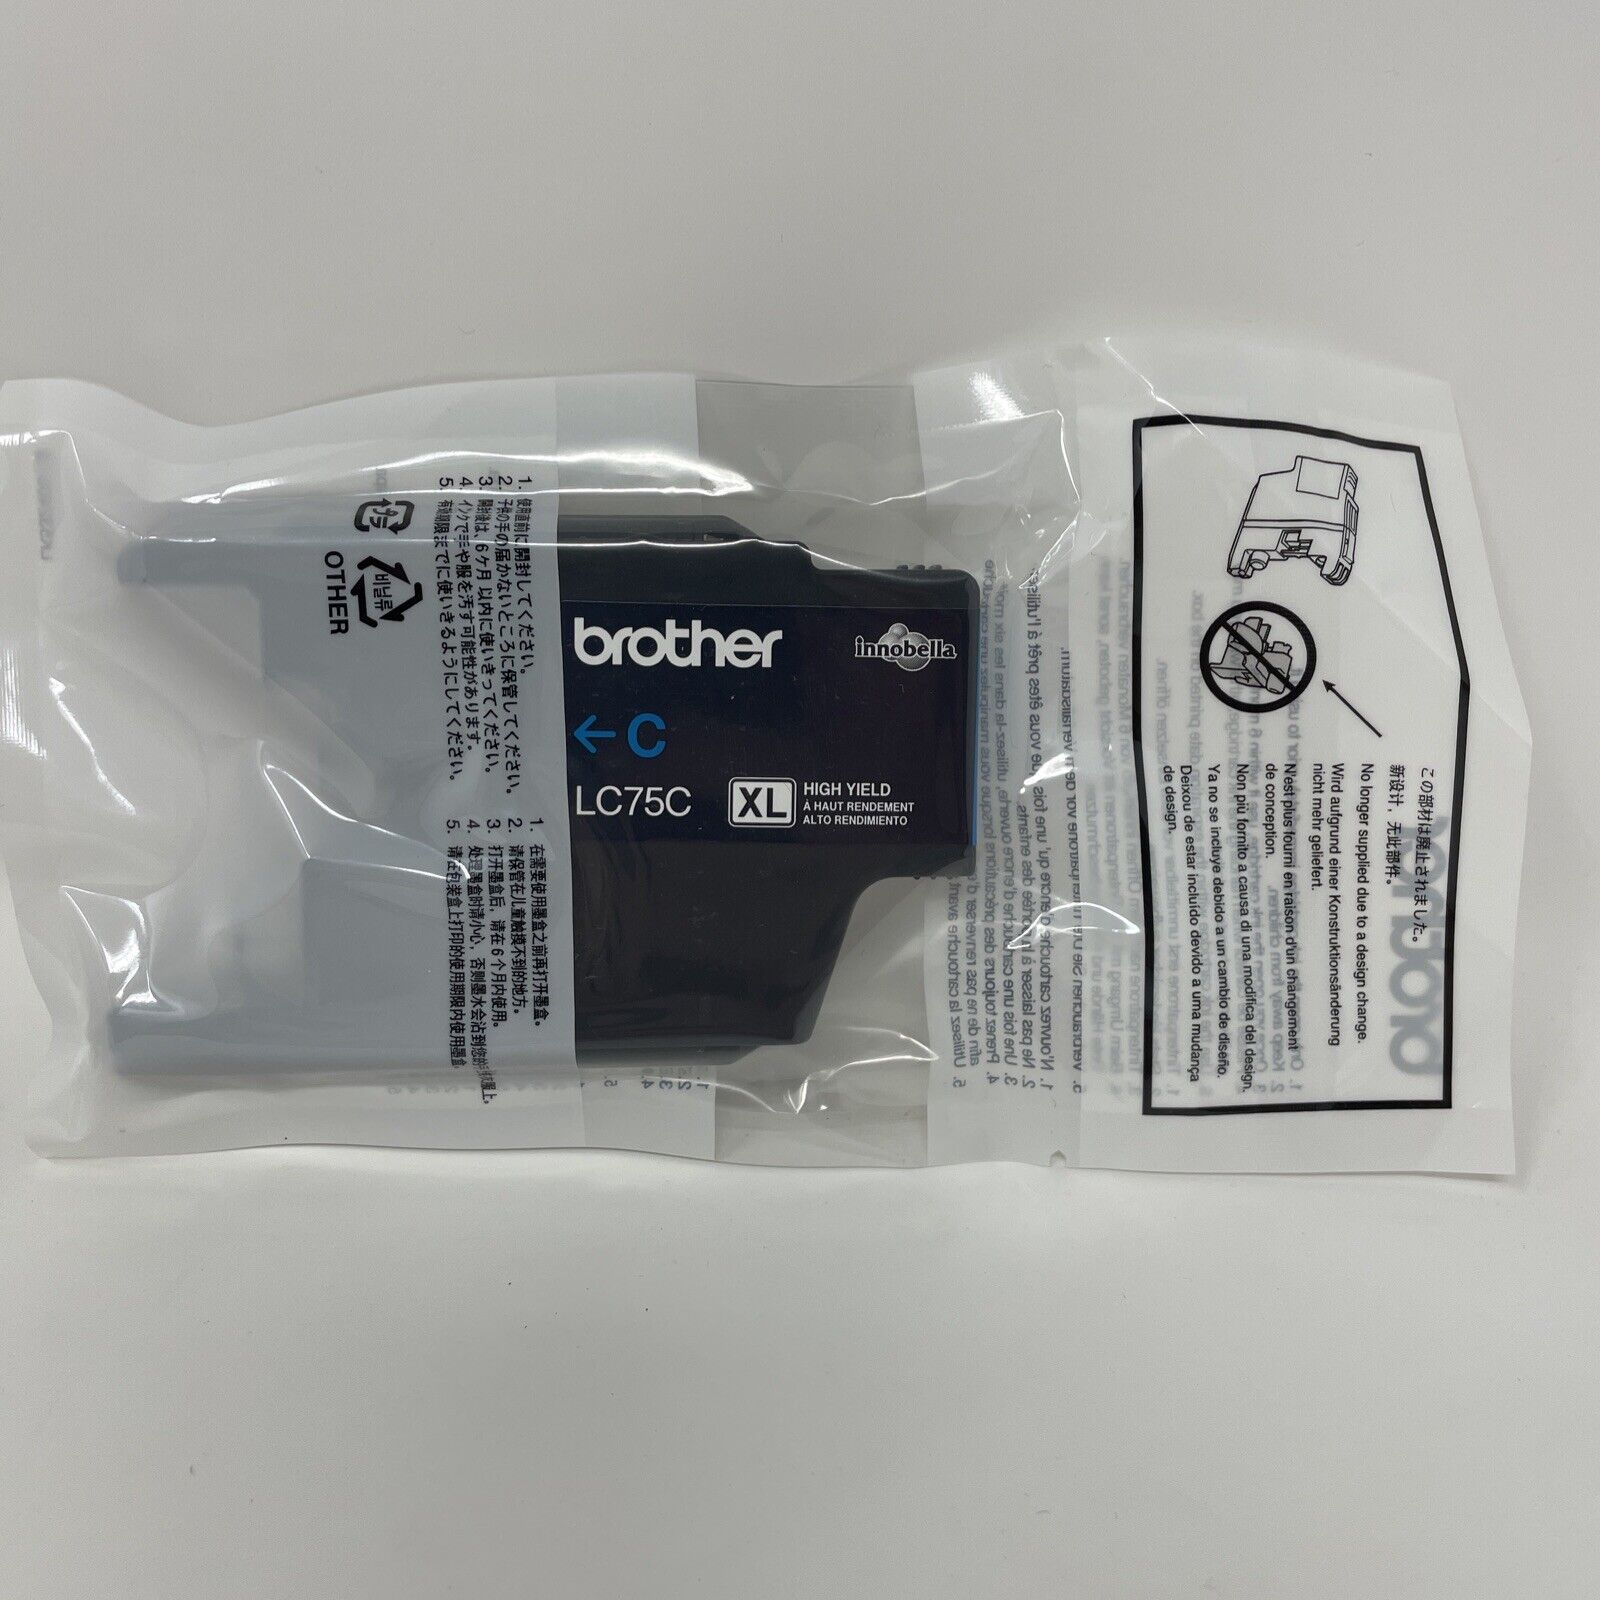 New unopened GENUINE BROTHER PRINTER INK cartridge - LC75C - XL size Cyan